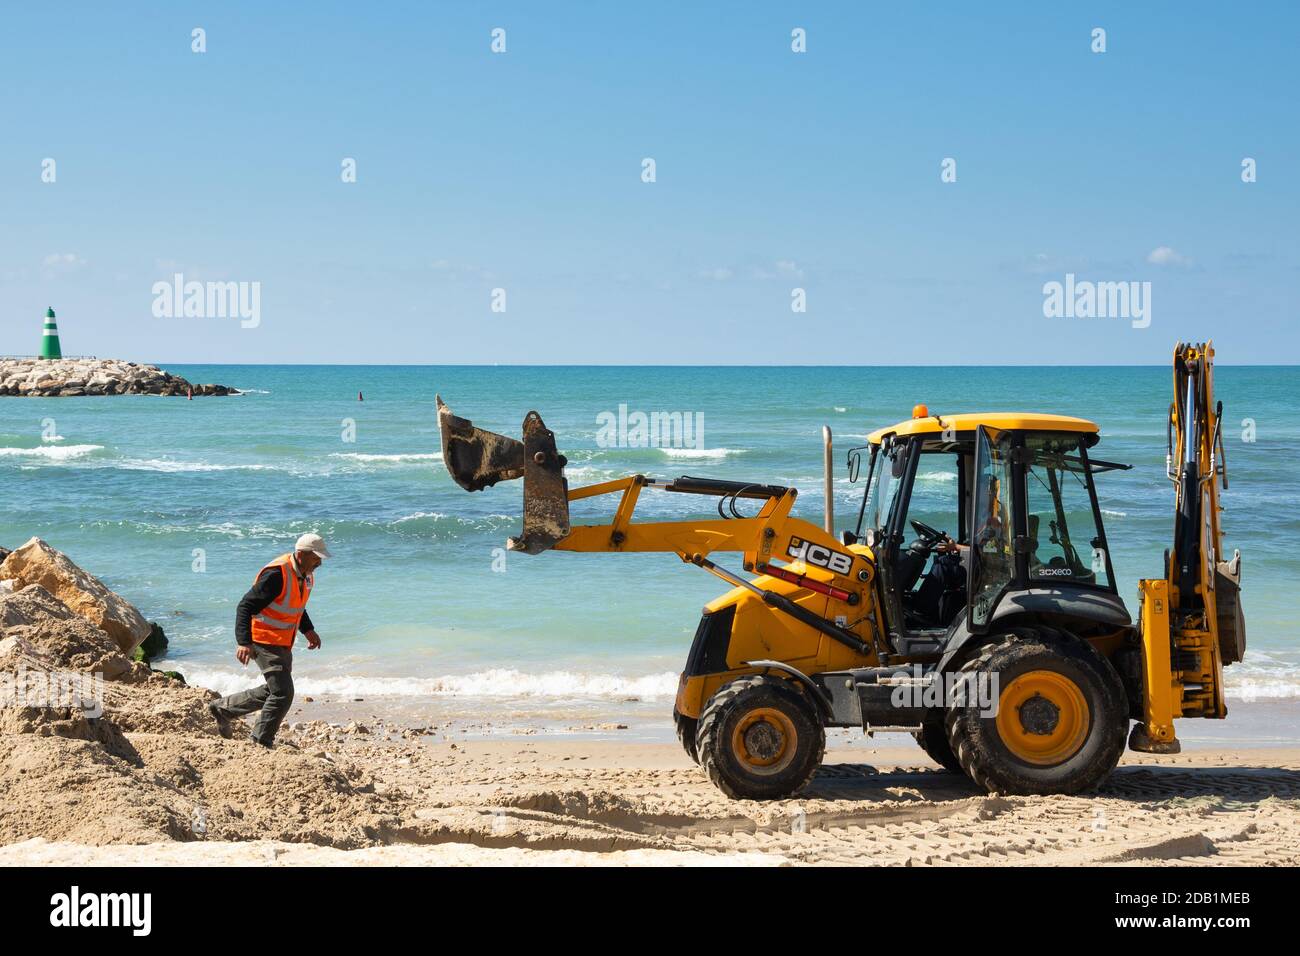 TEL AVIV, ISRAEL - MARCH 6, 2019: Beach industrial scene. Workers making repairs at the beach with digger . Stock Photo